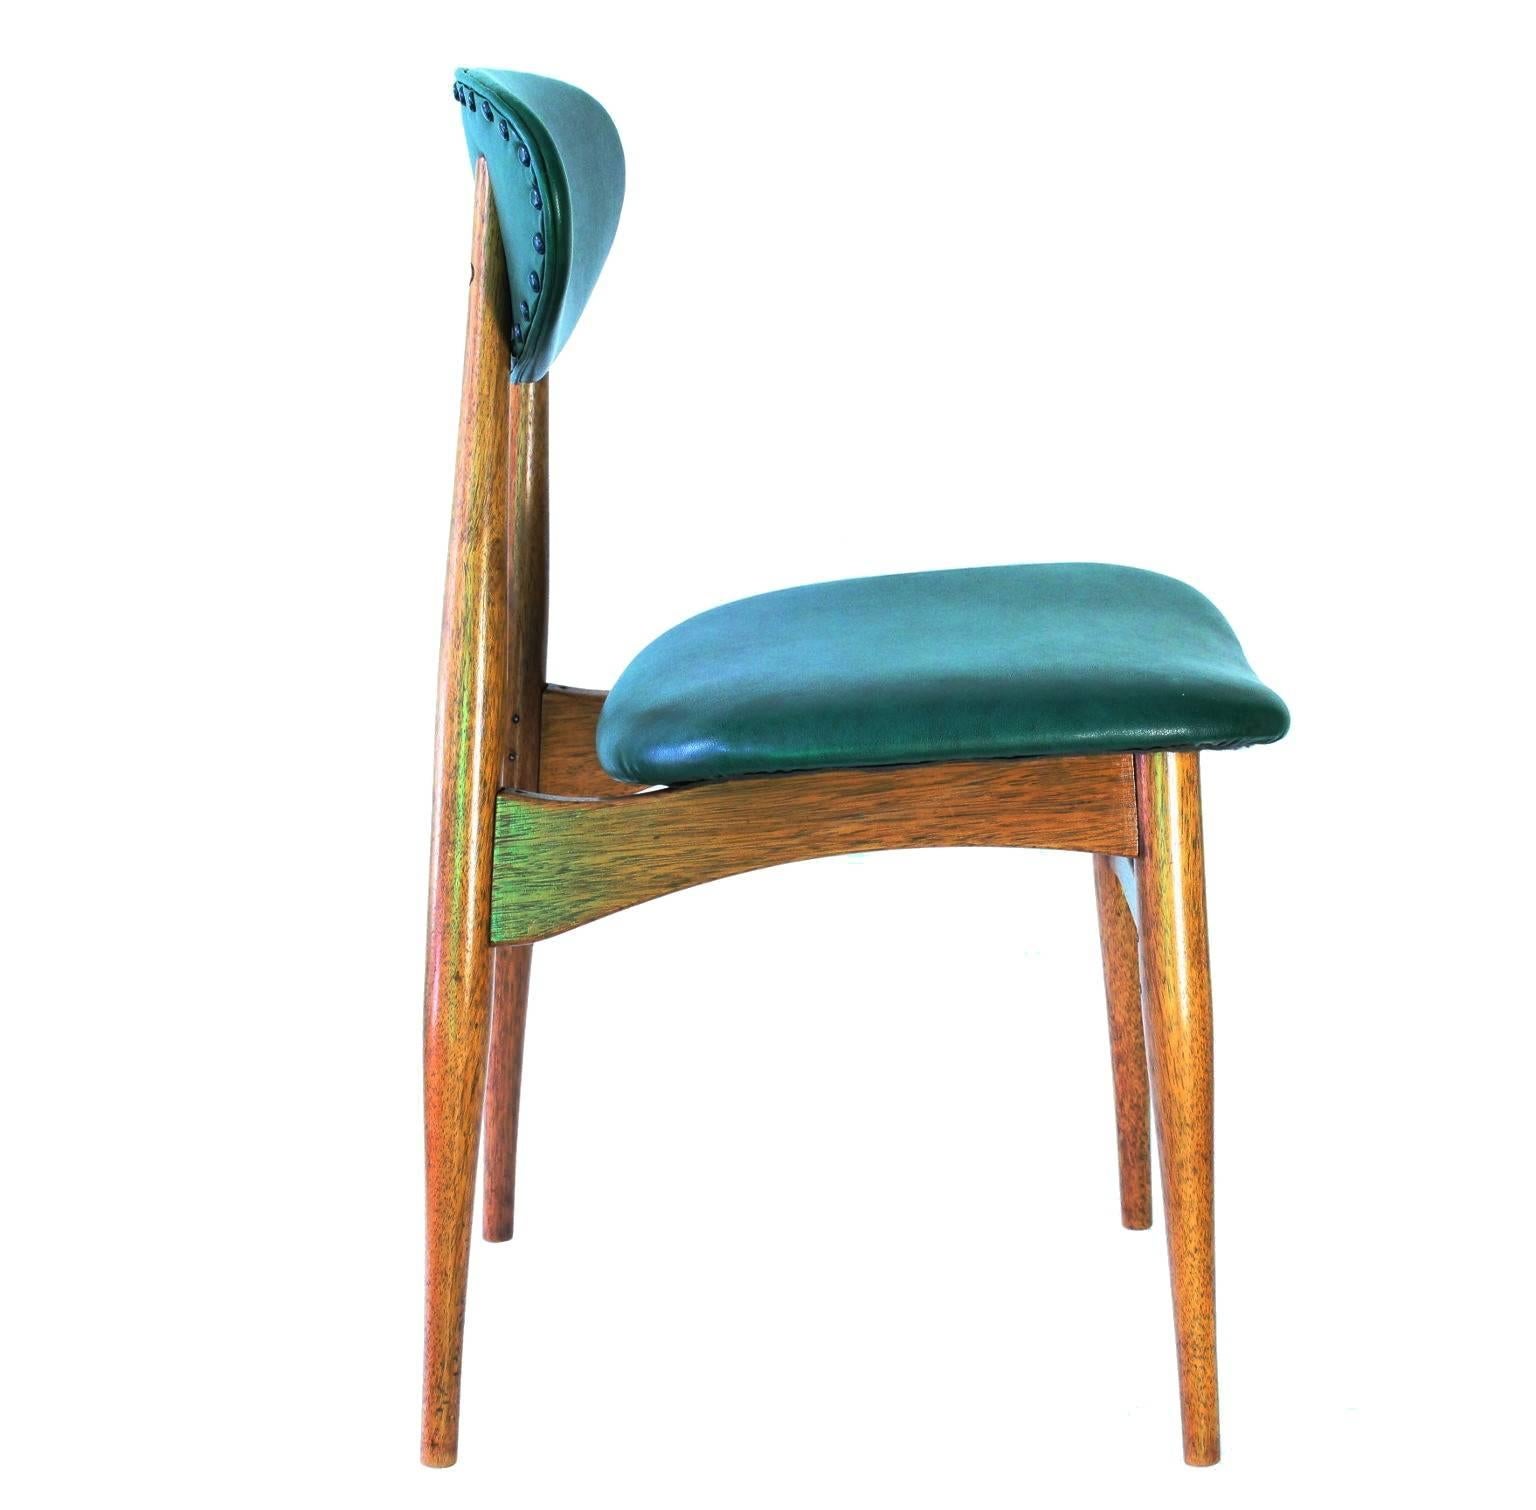 A vintage set of four teakwood dining chairs, produced in Denmark, circa 1950s, each with unique fasteners, connecting the tapered legs and horizontal supports. Comfortable and sturdy, the backs and seats were recently reupholstered in vinyl,